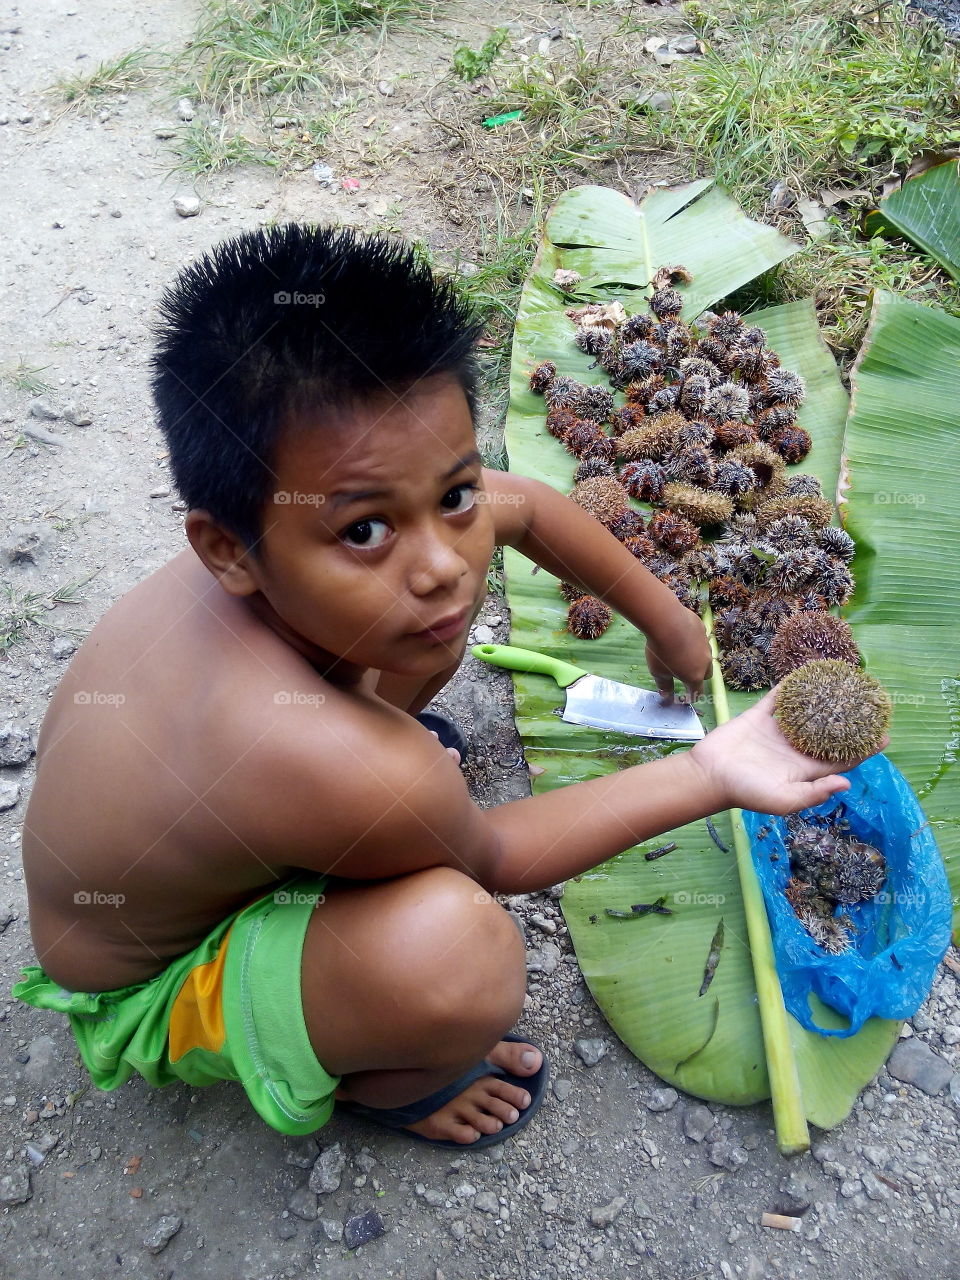 This is my son Coby. We are living in a small island called Siquijor in Philippines. We sorrounded by waters. The main occupation here is fishing so kids used to collect urchin in the seaside.